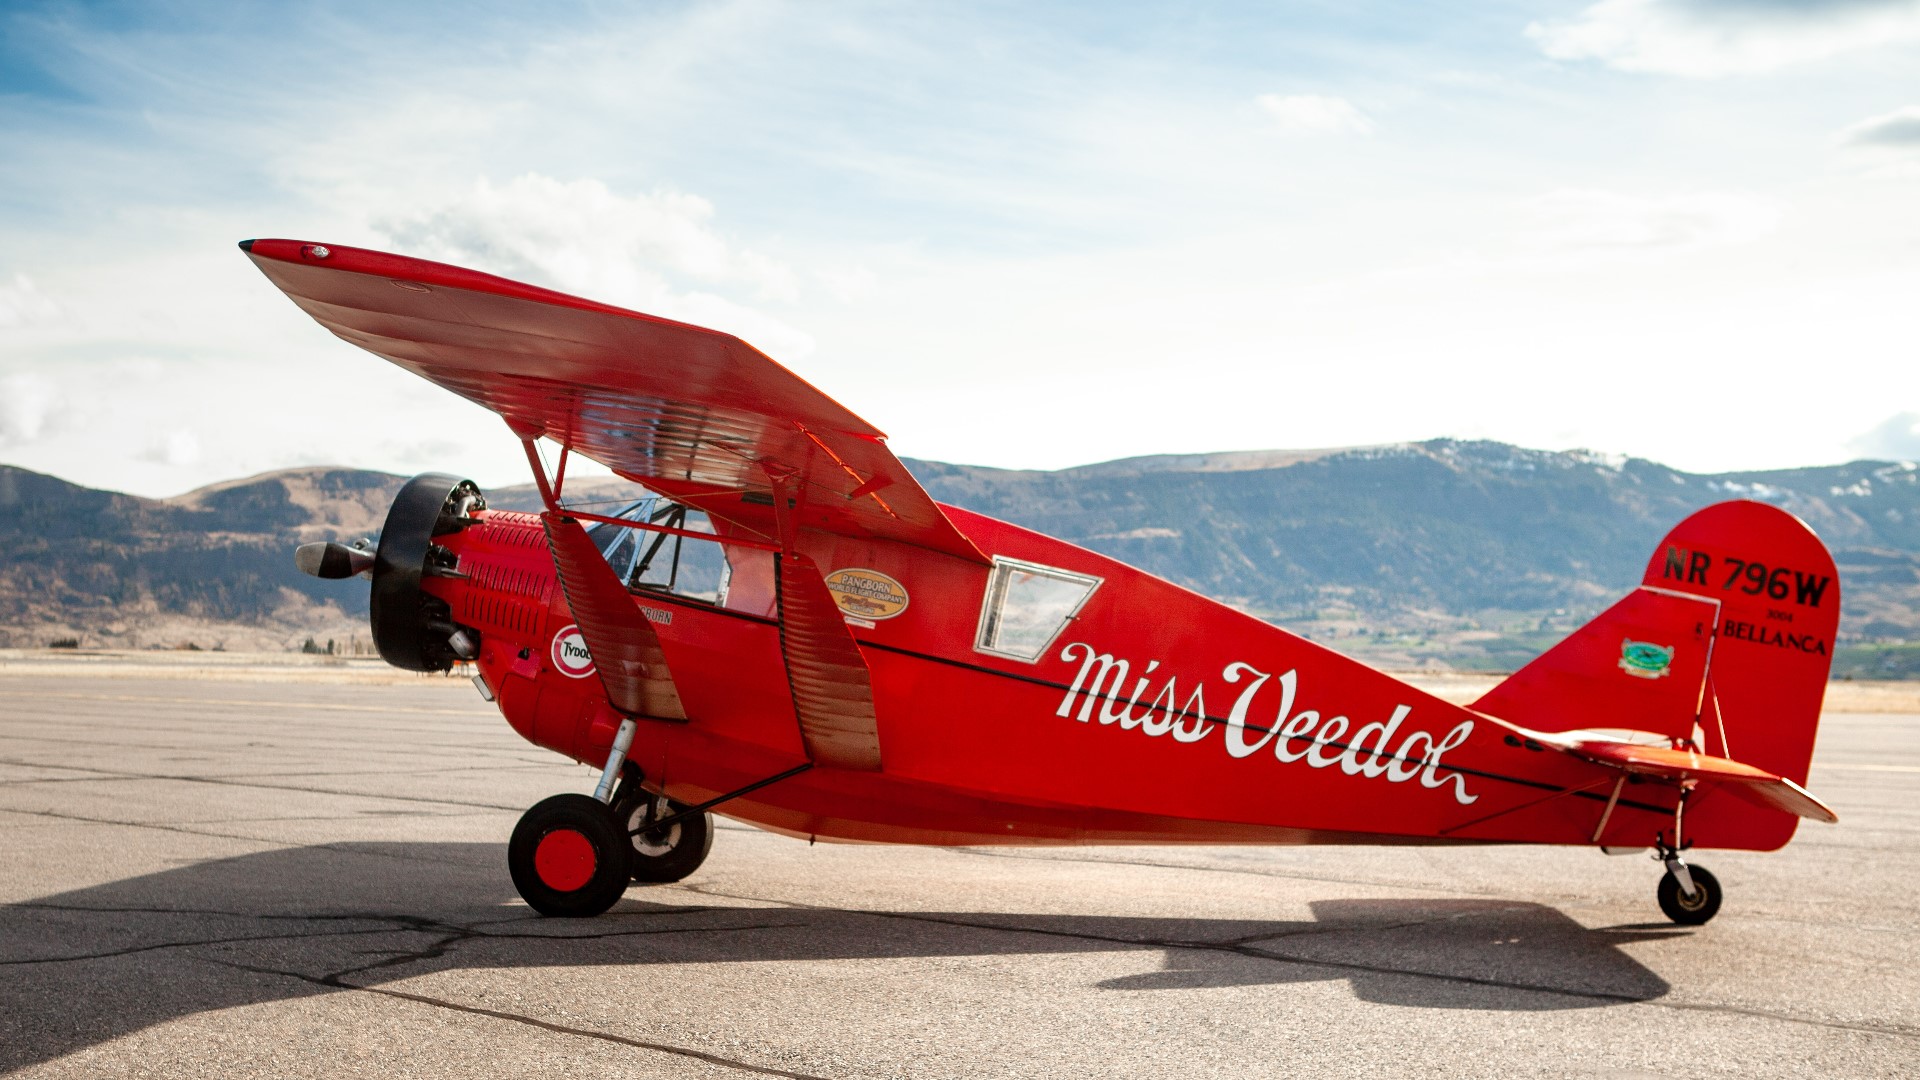 A bent propeller, a preserved sandwich, and a red plane honor aviation achievement. #k5evening